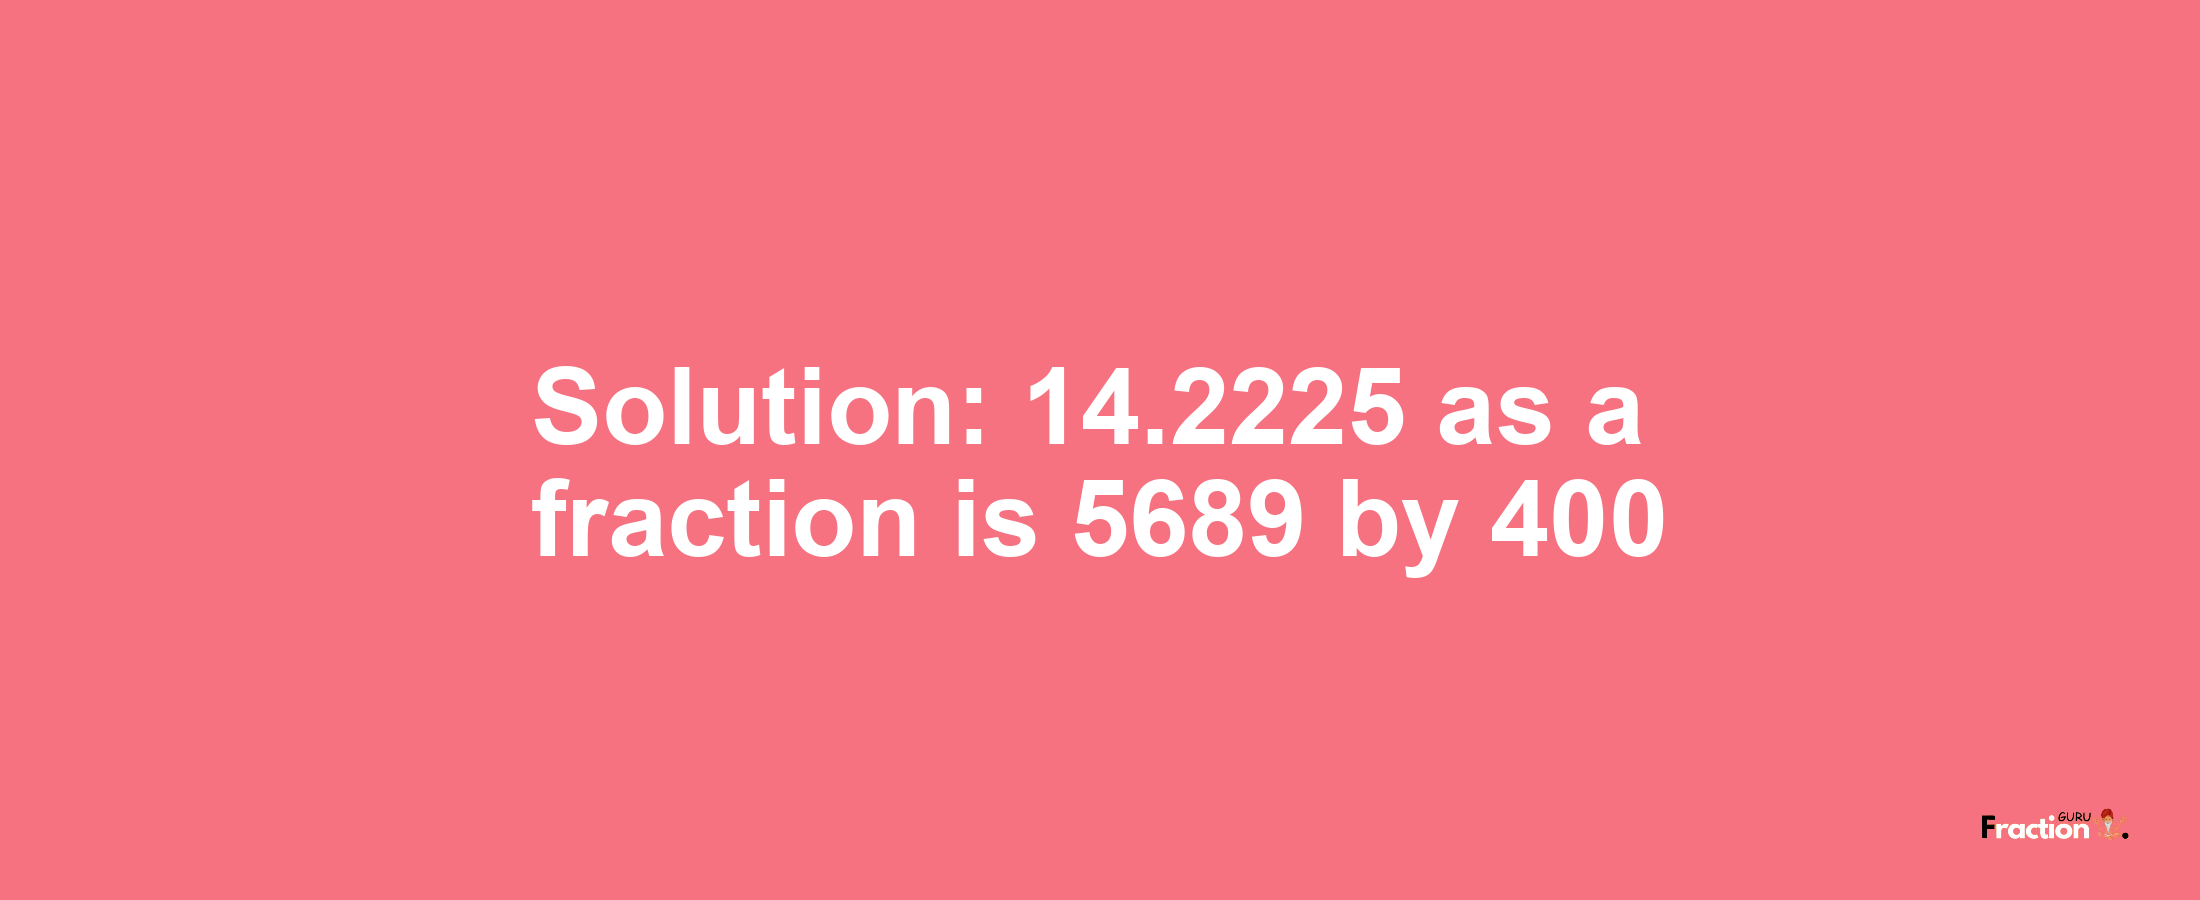 Solution:14.2225 as a fraction is 5689/400